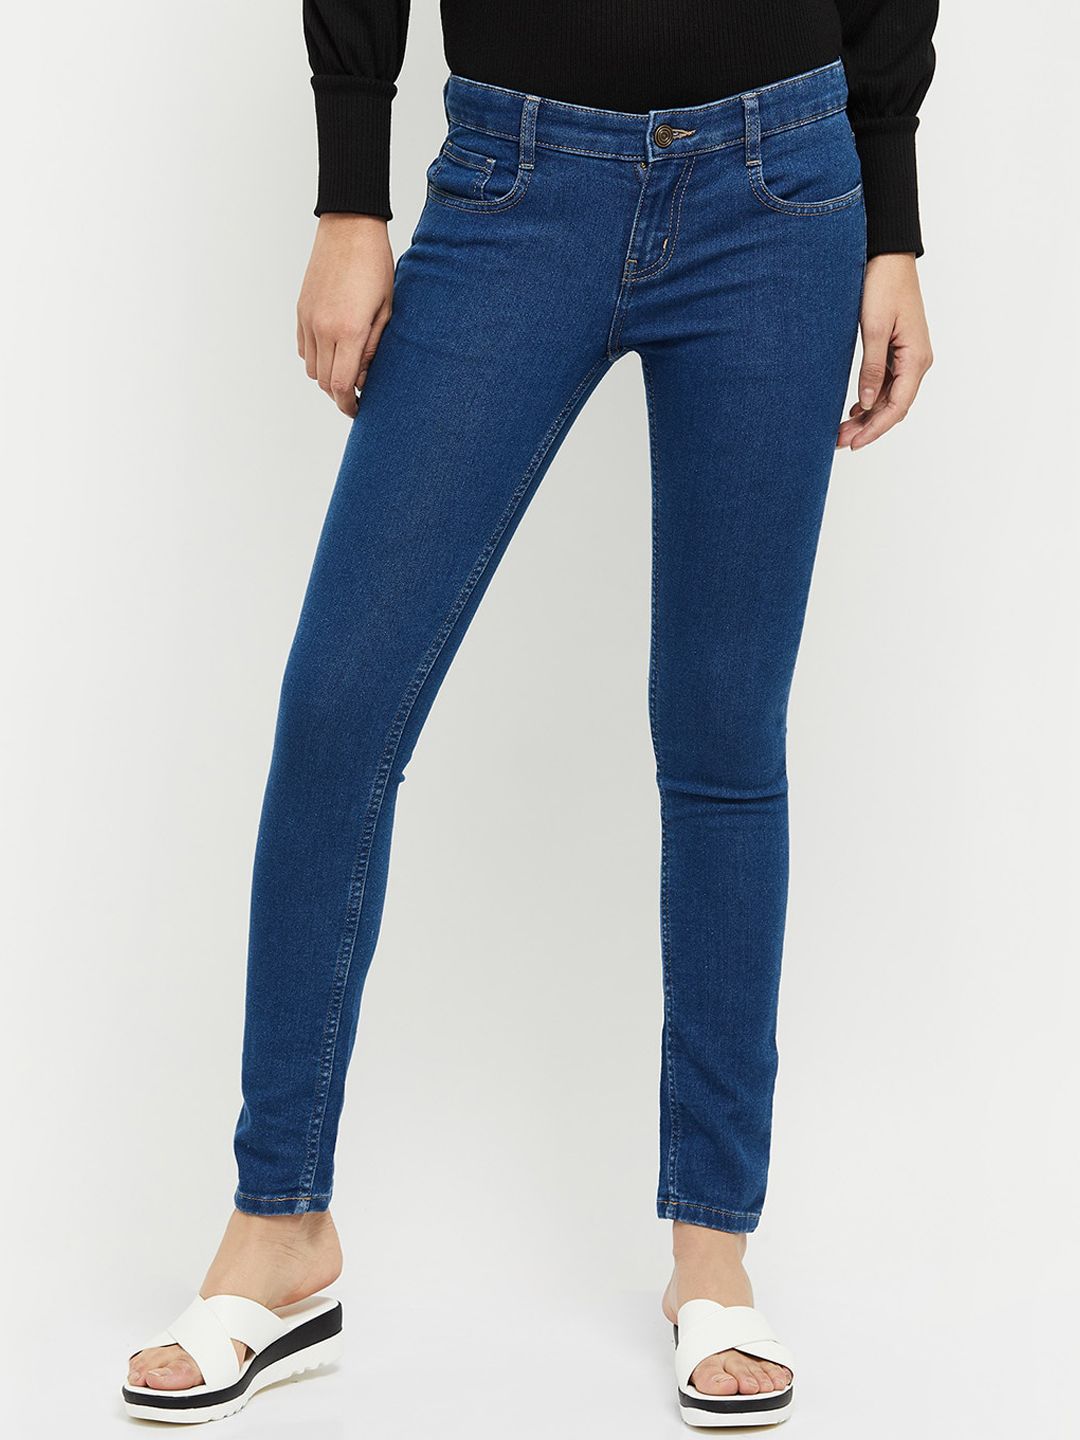 max Women Blue Skinny Fit Jeans Price in India